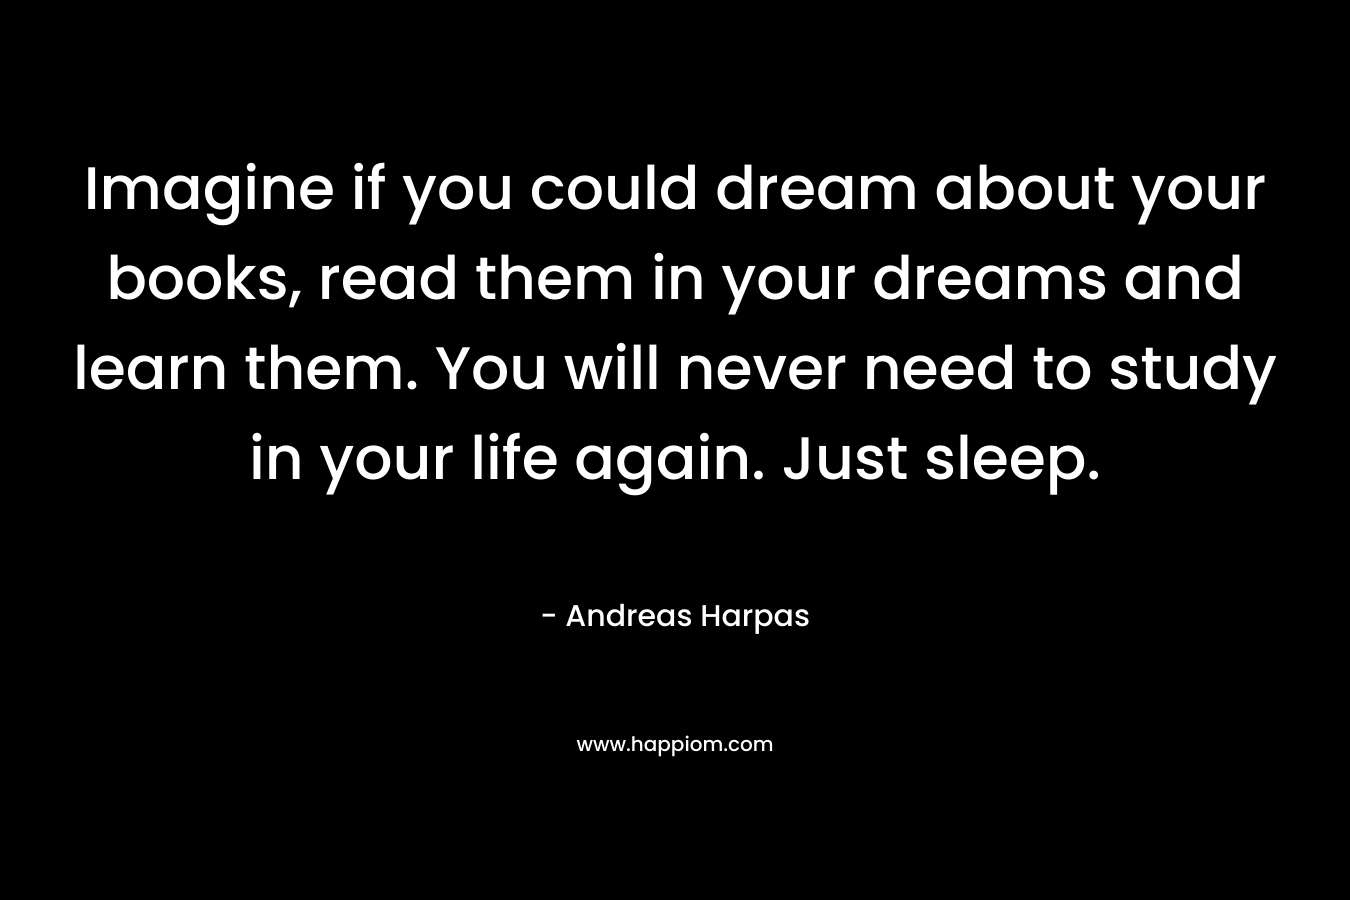 Imagine if you could dream about your books, read them in your dreams and learn them. You will never need to study in your life again. Just sleep.